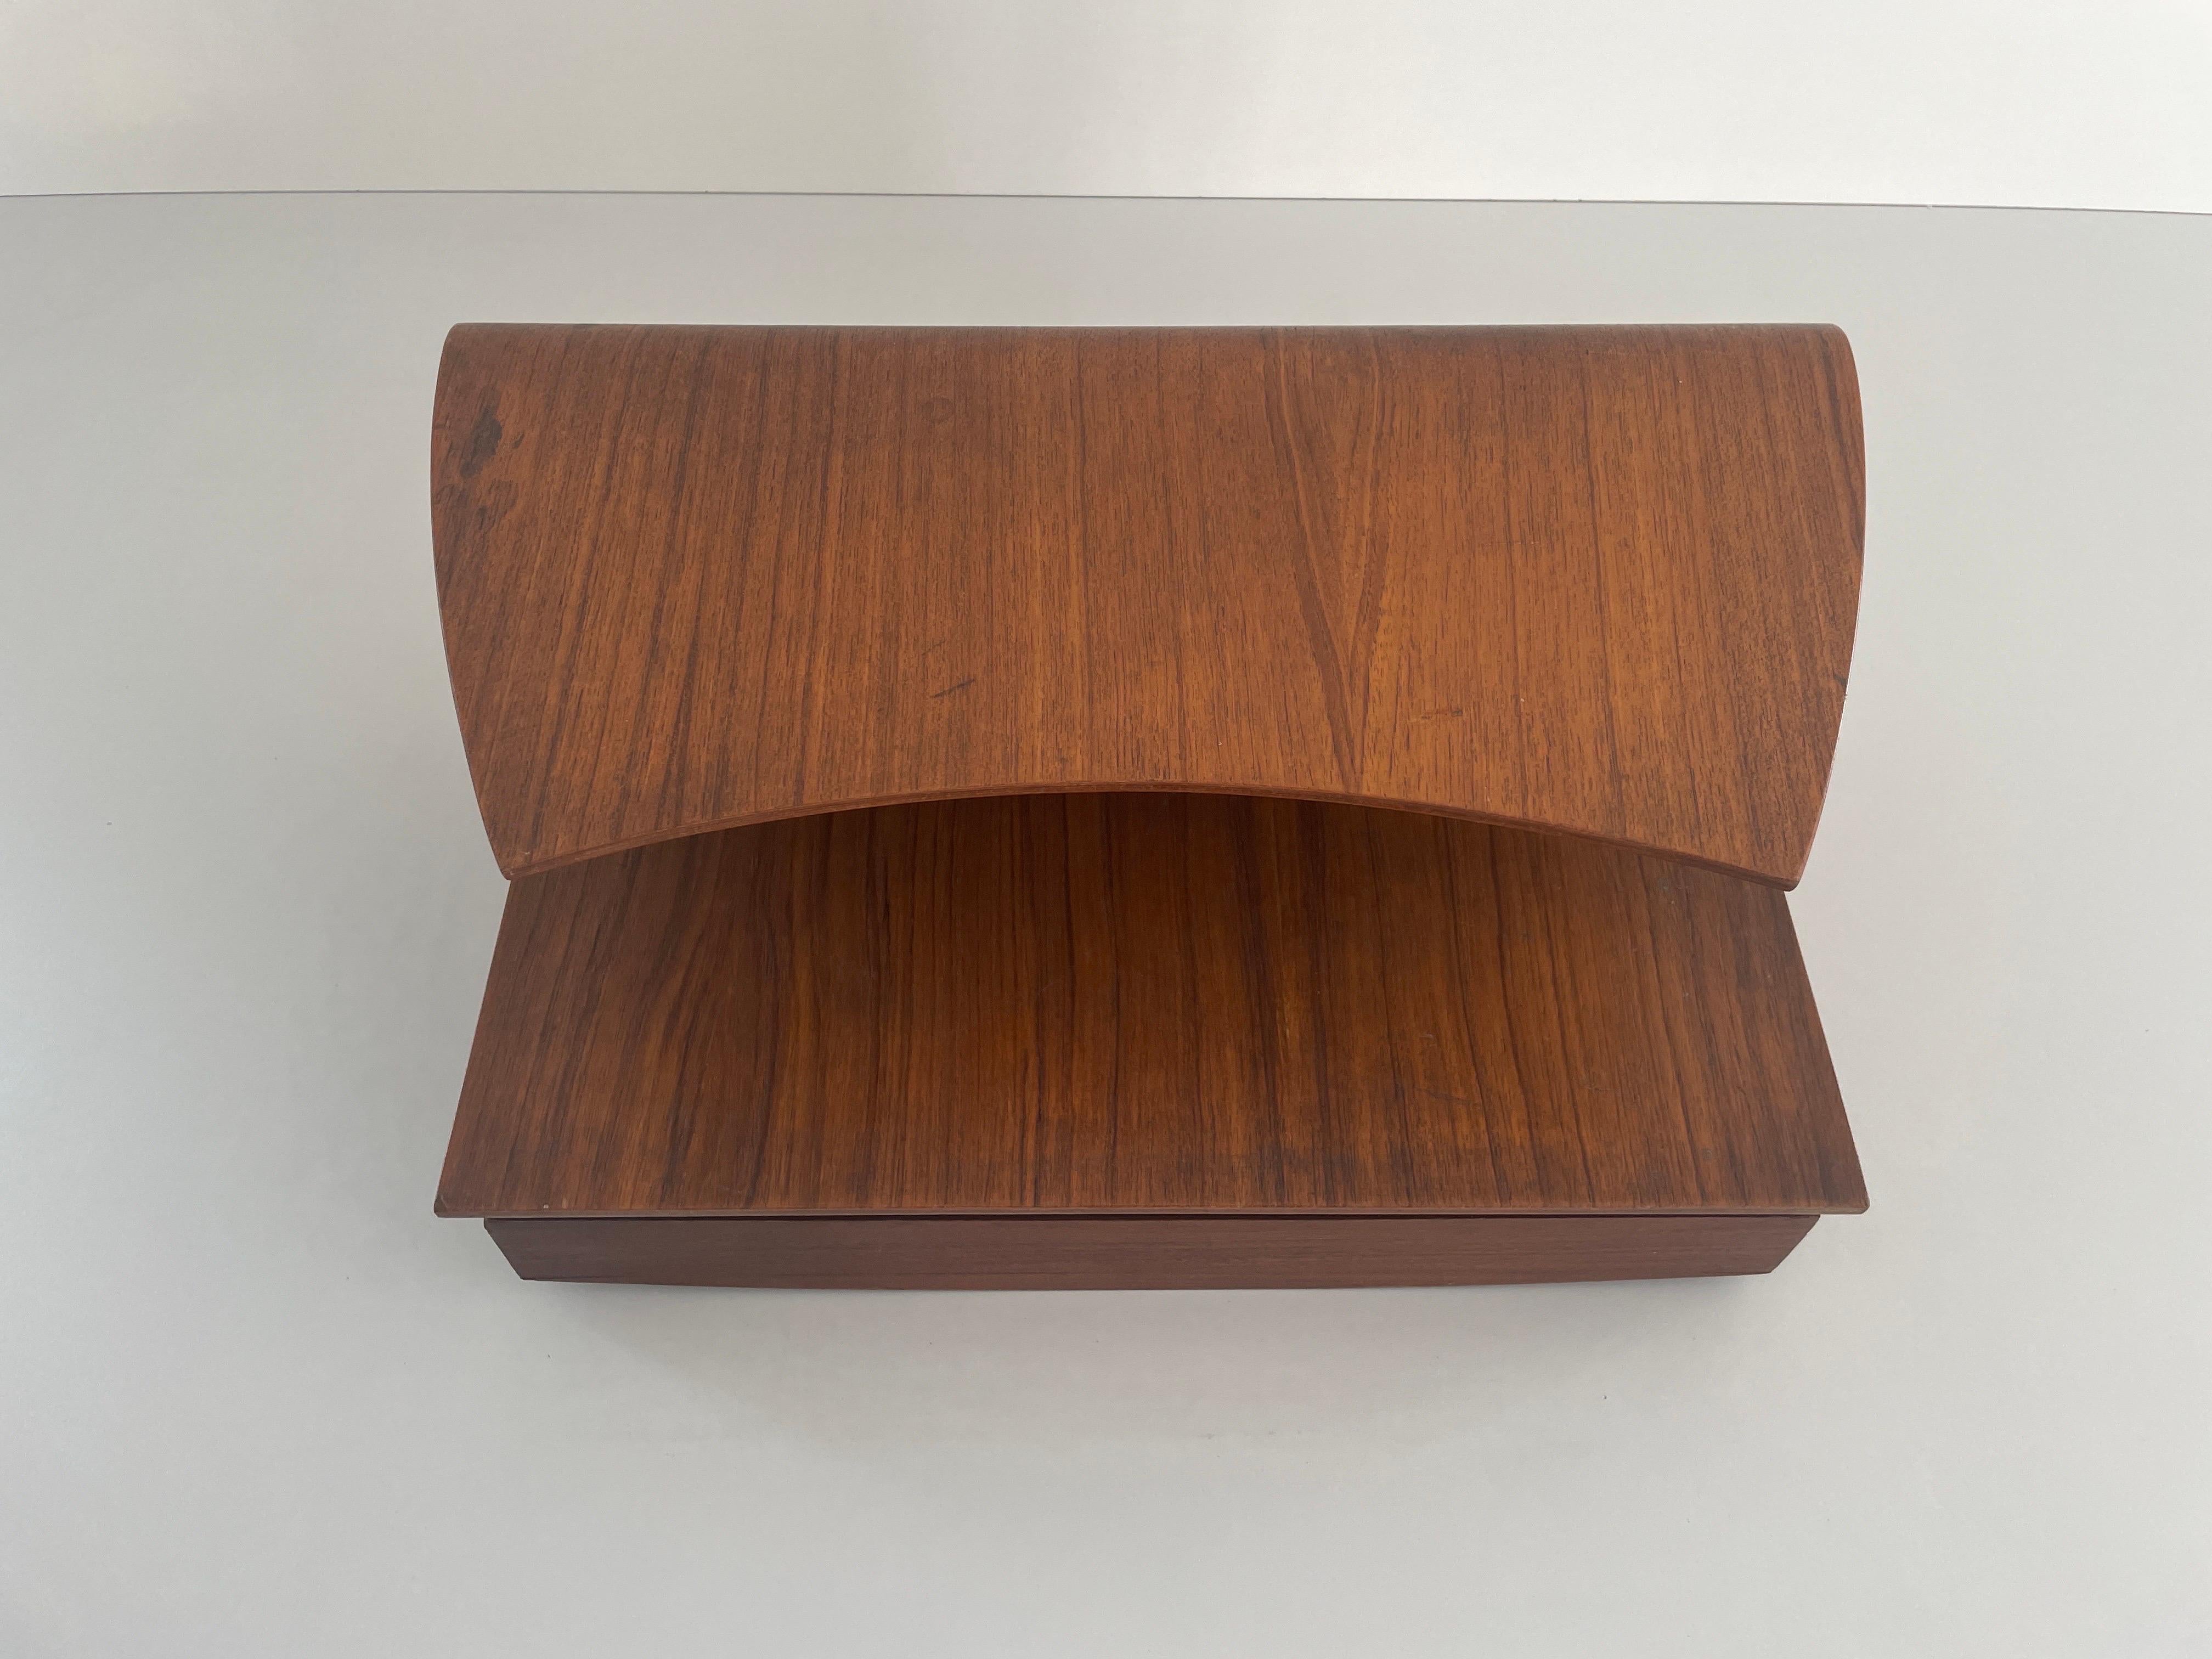 Italian Wood Floating Shelf with Drawer, 1960s, Italy For Sale 2